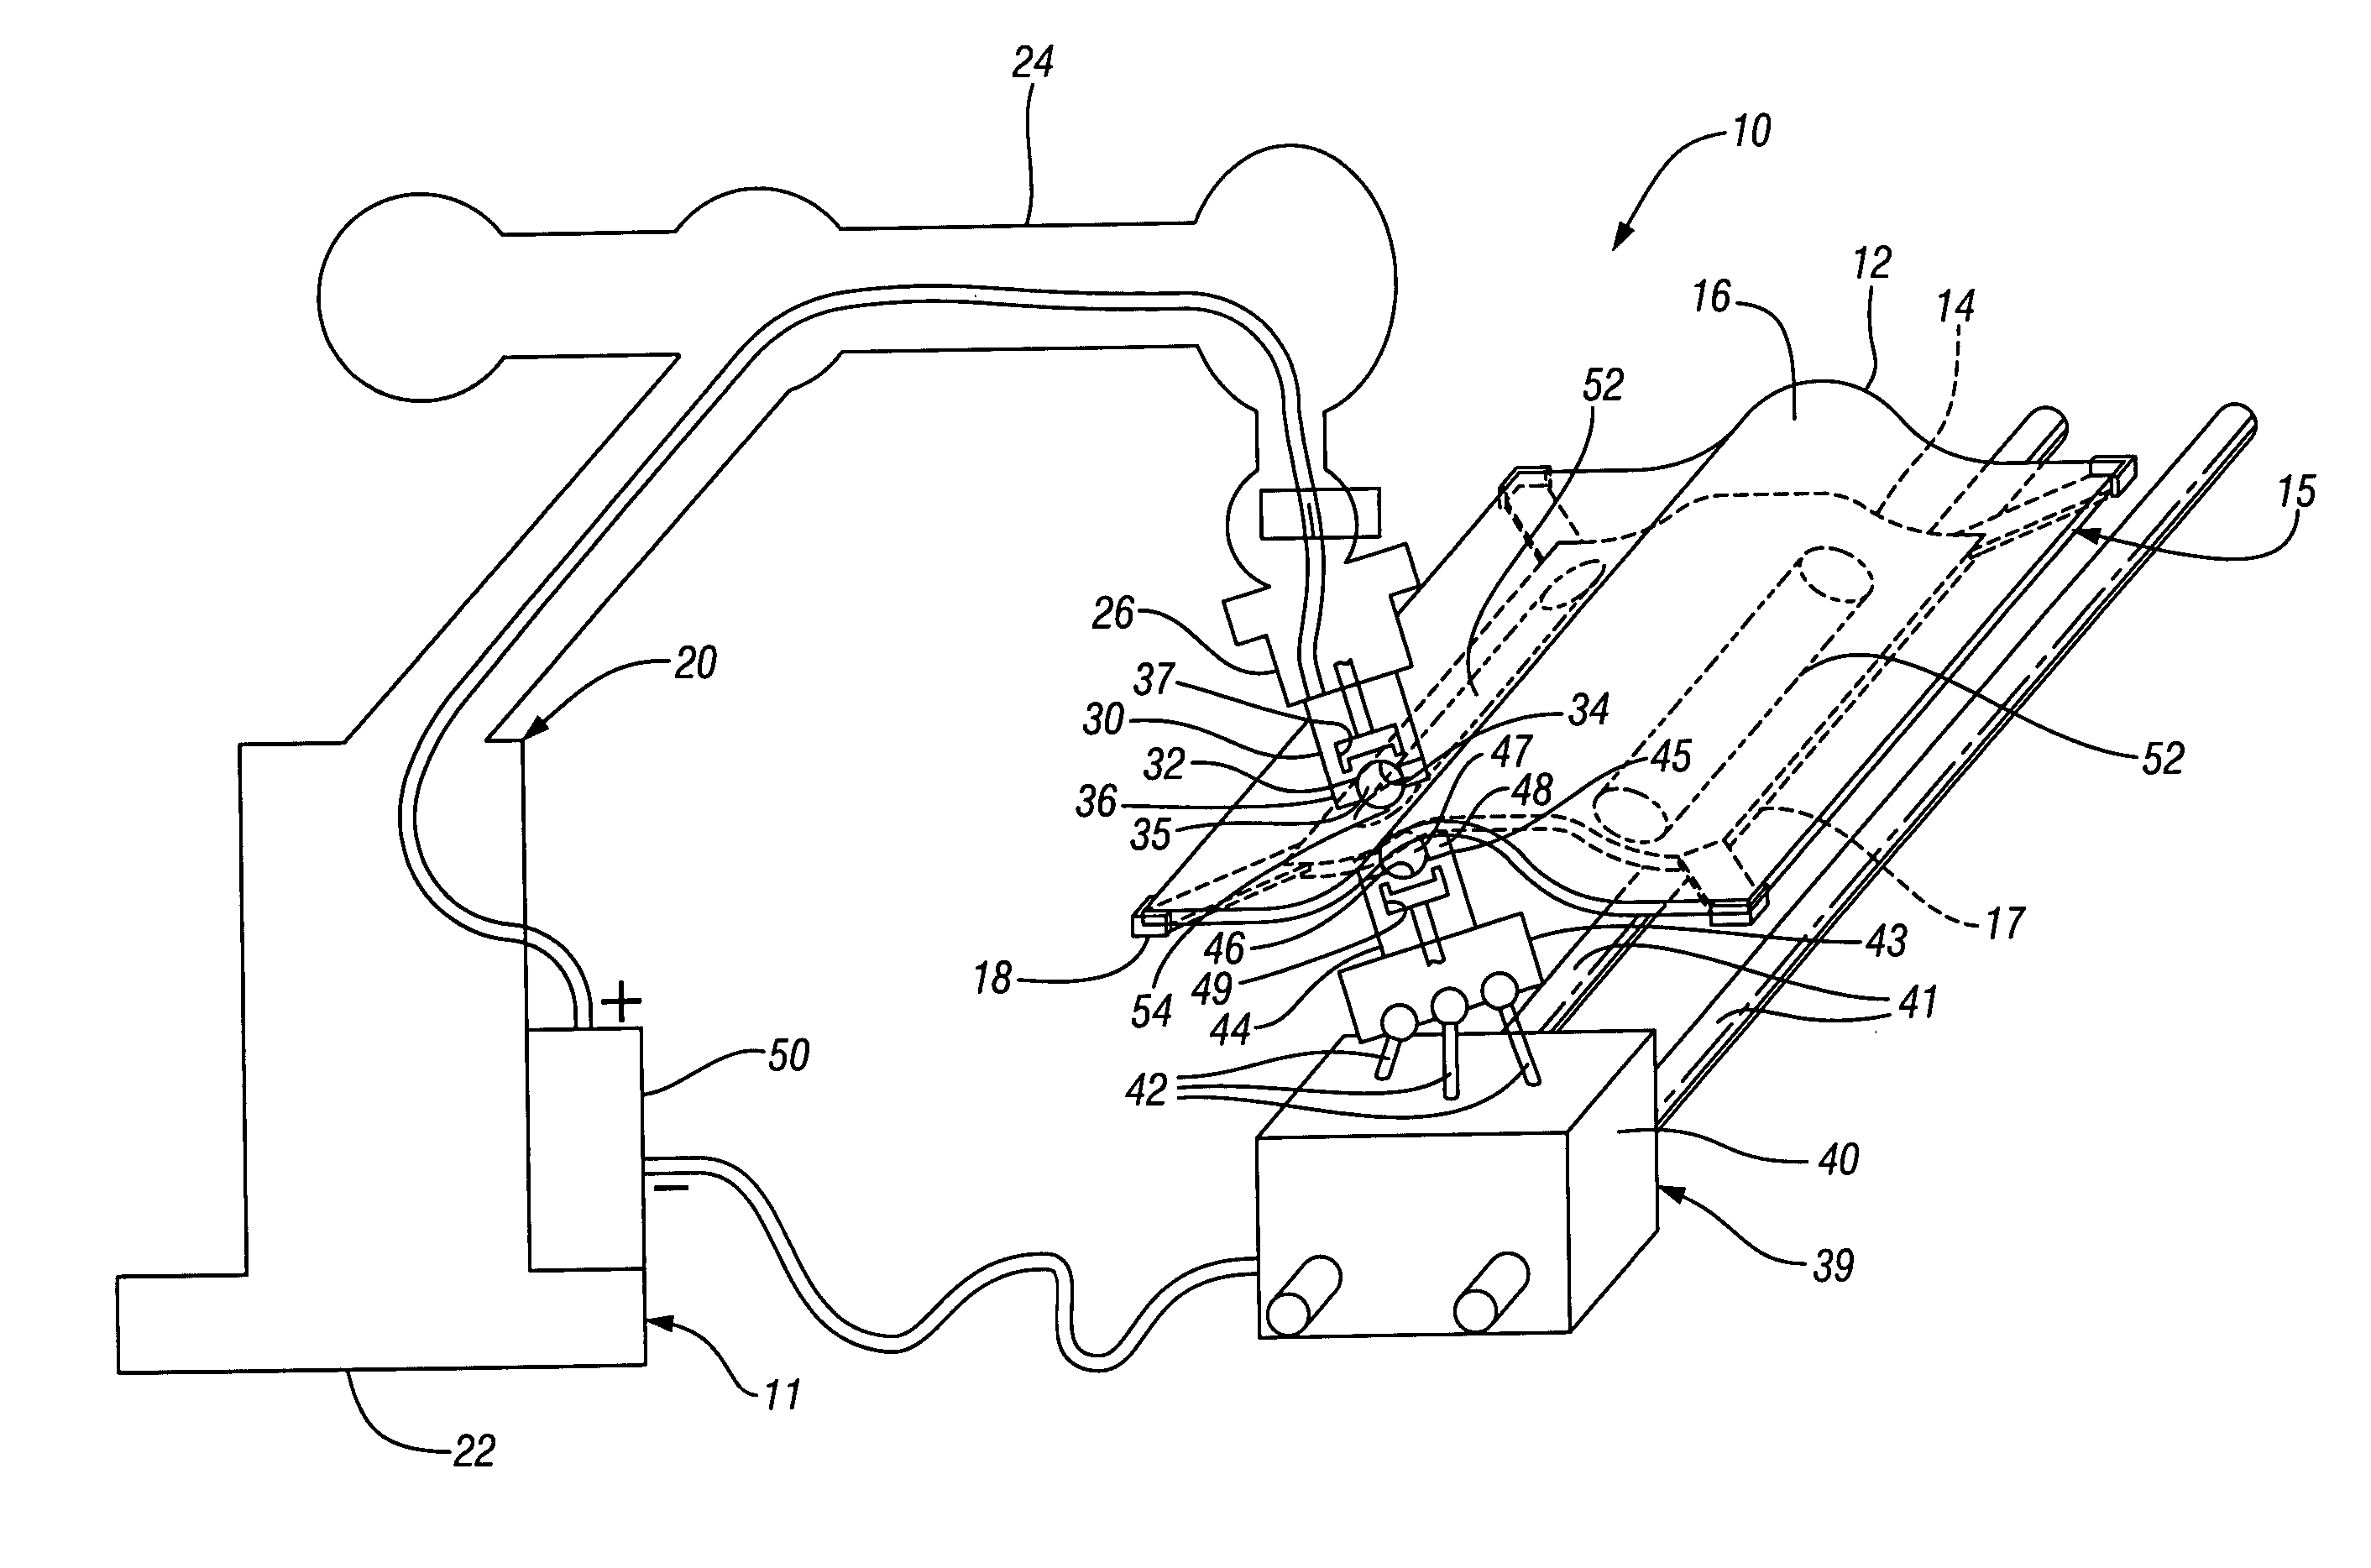 Programmable resistance seam welding apparatus and method